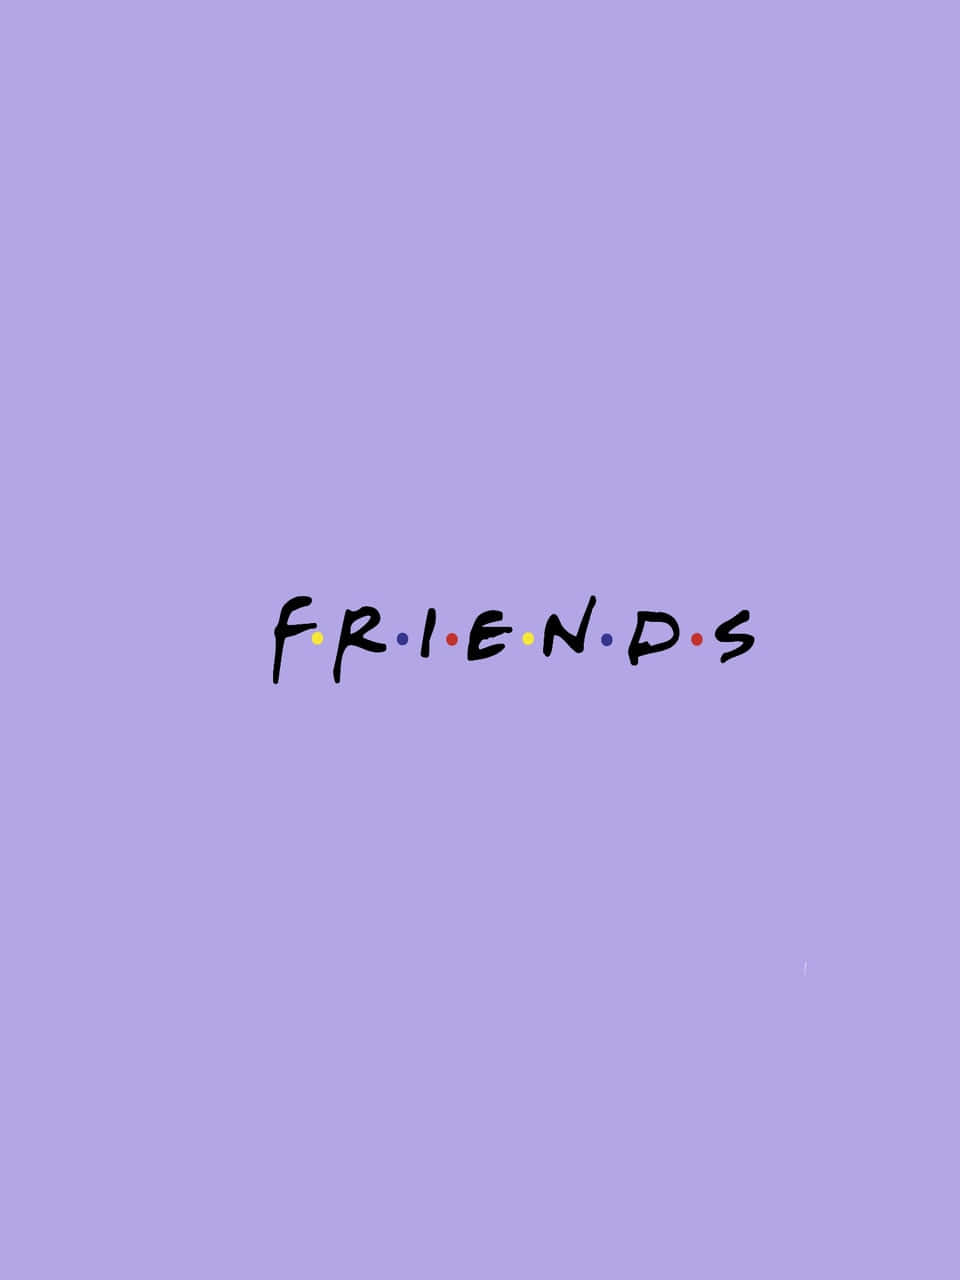 friends wallpapers for your phone Wallpaper